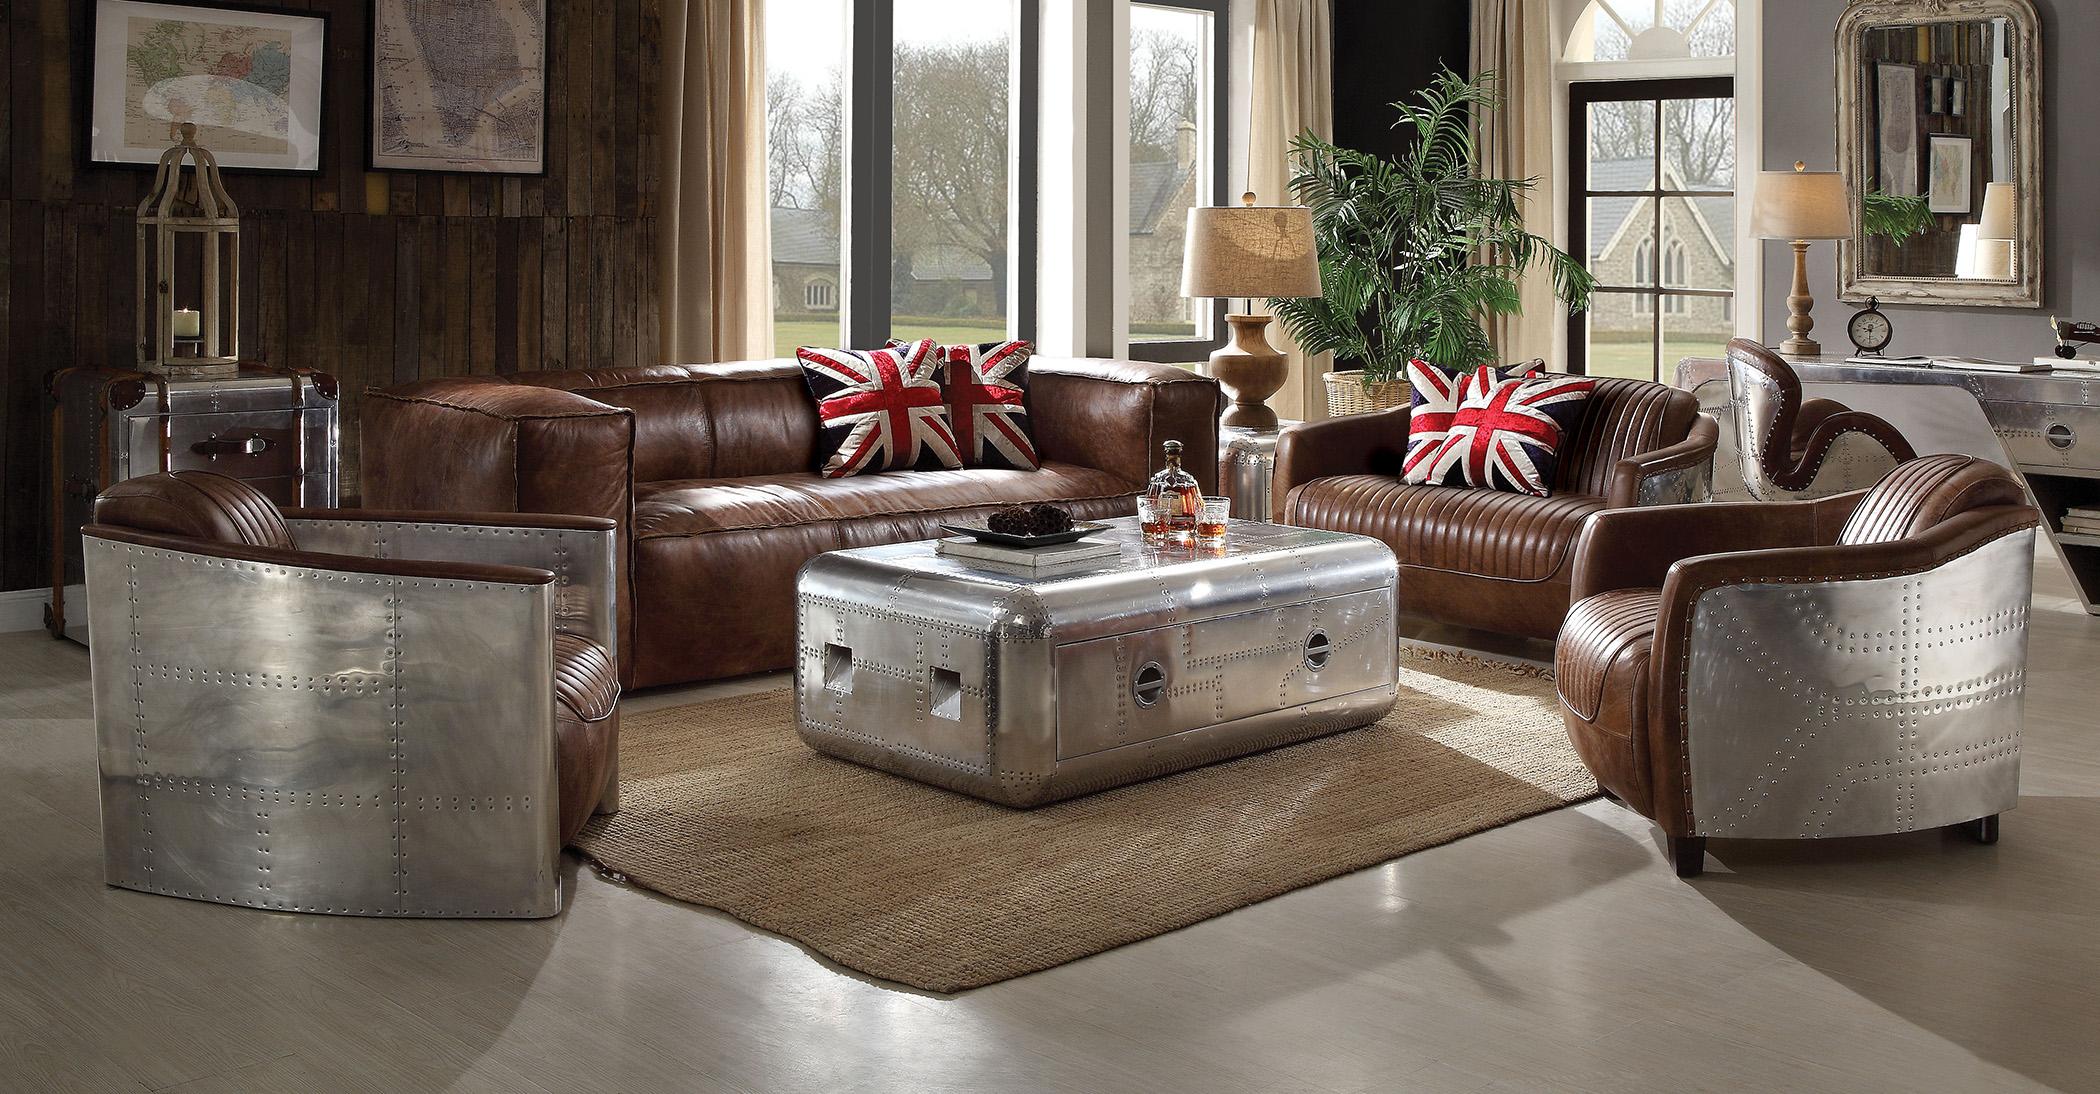 

        
Acme Furniture Brancaster 53545 Sofa Loveseat and Chair Set Brown Geniune Leather 0840412044465
